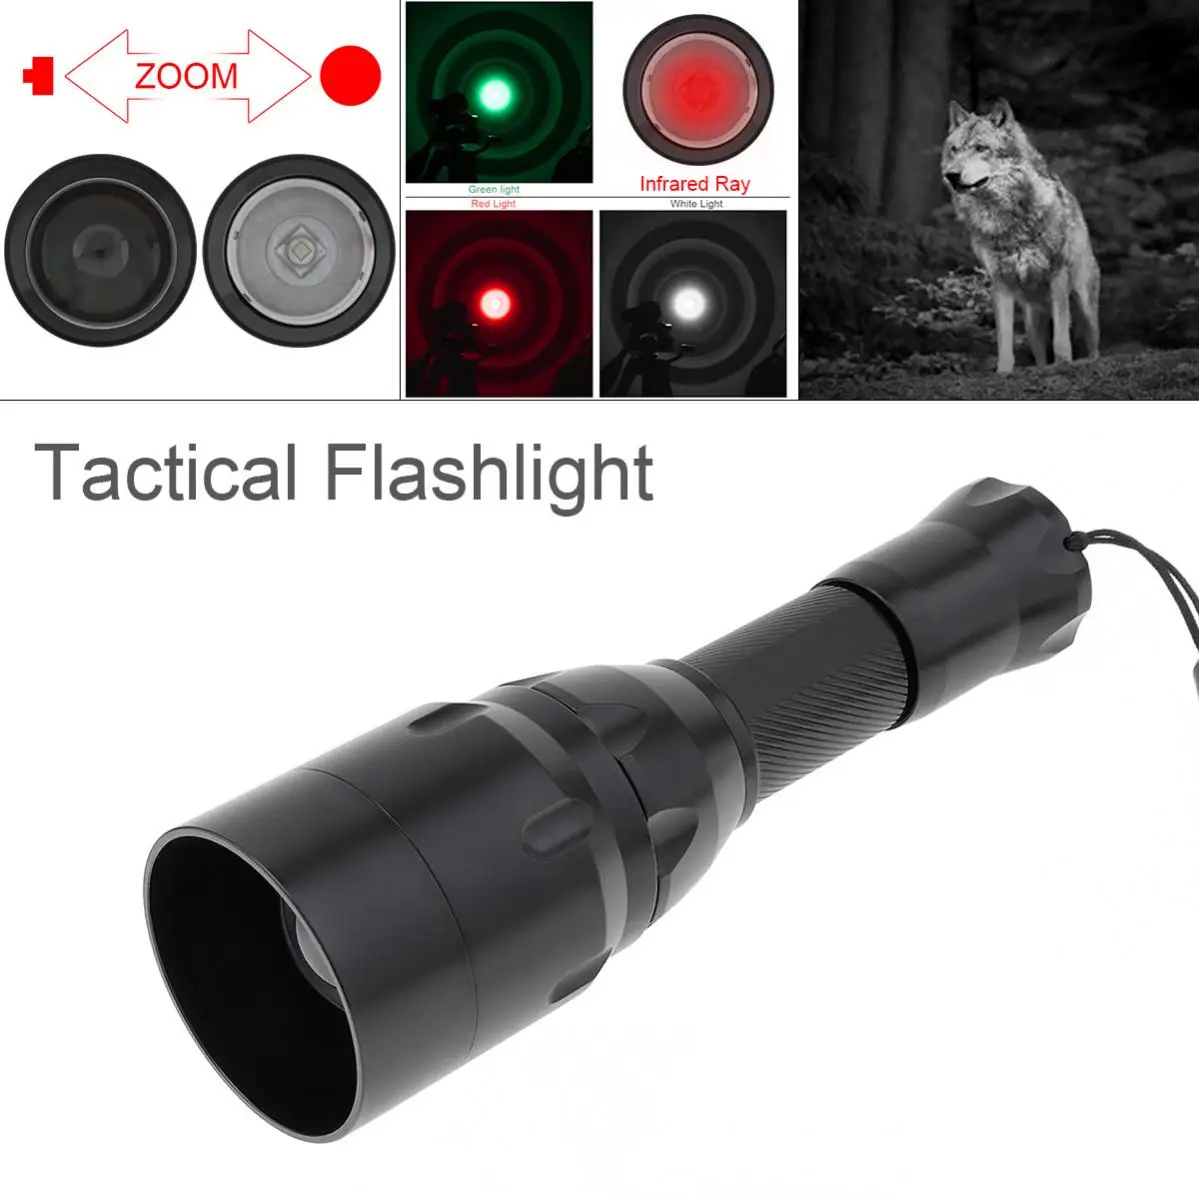 

C16 Zoomable Focus Adjustable 1500 Lumens XPE Infrared Light 850nm LED Range Radiation Flashlight for Hunting and Fishing